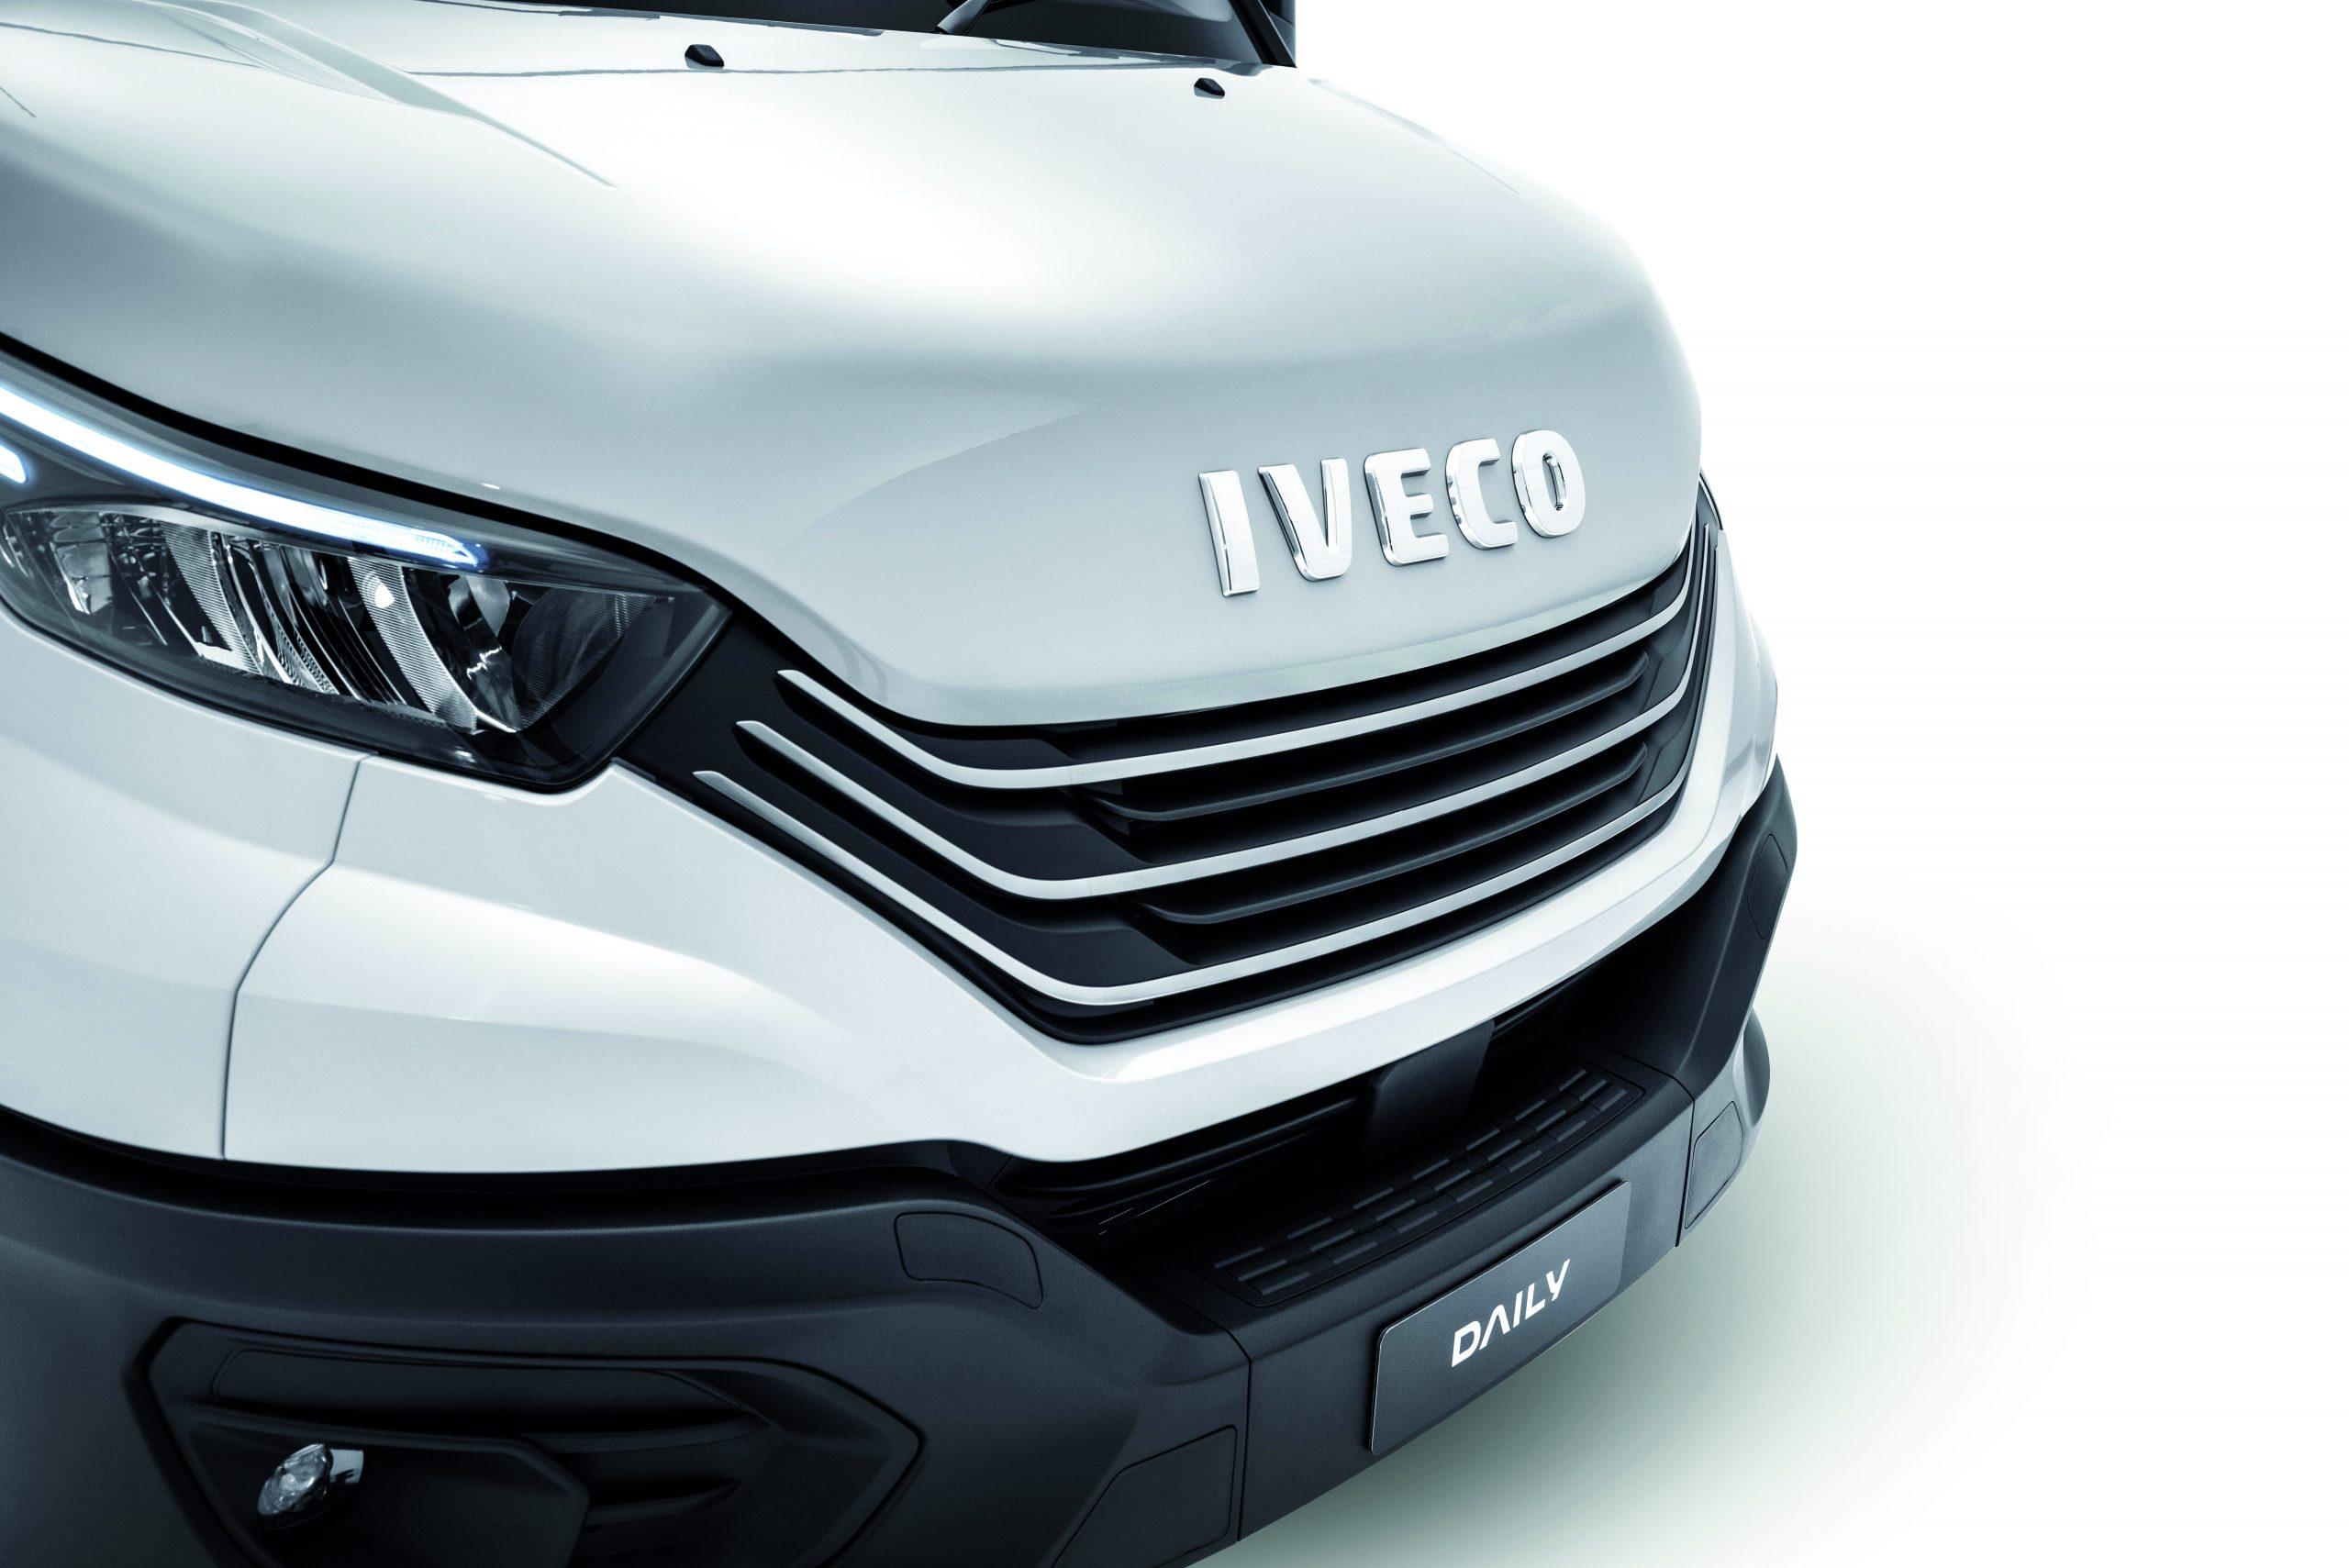 New Iveco Daily van revealed - Car News